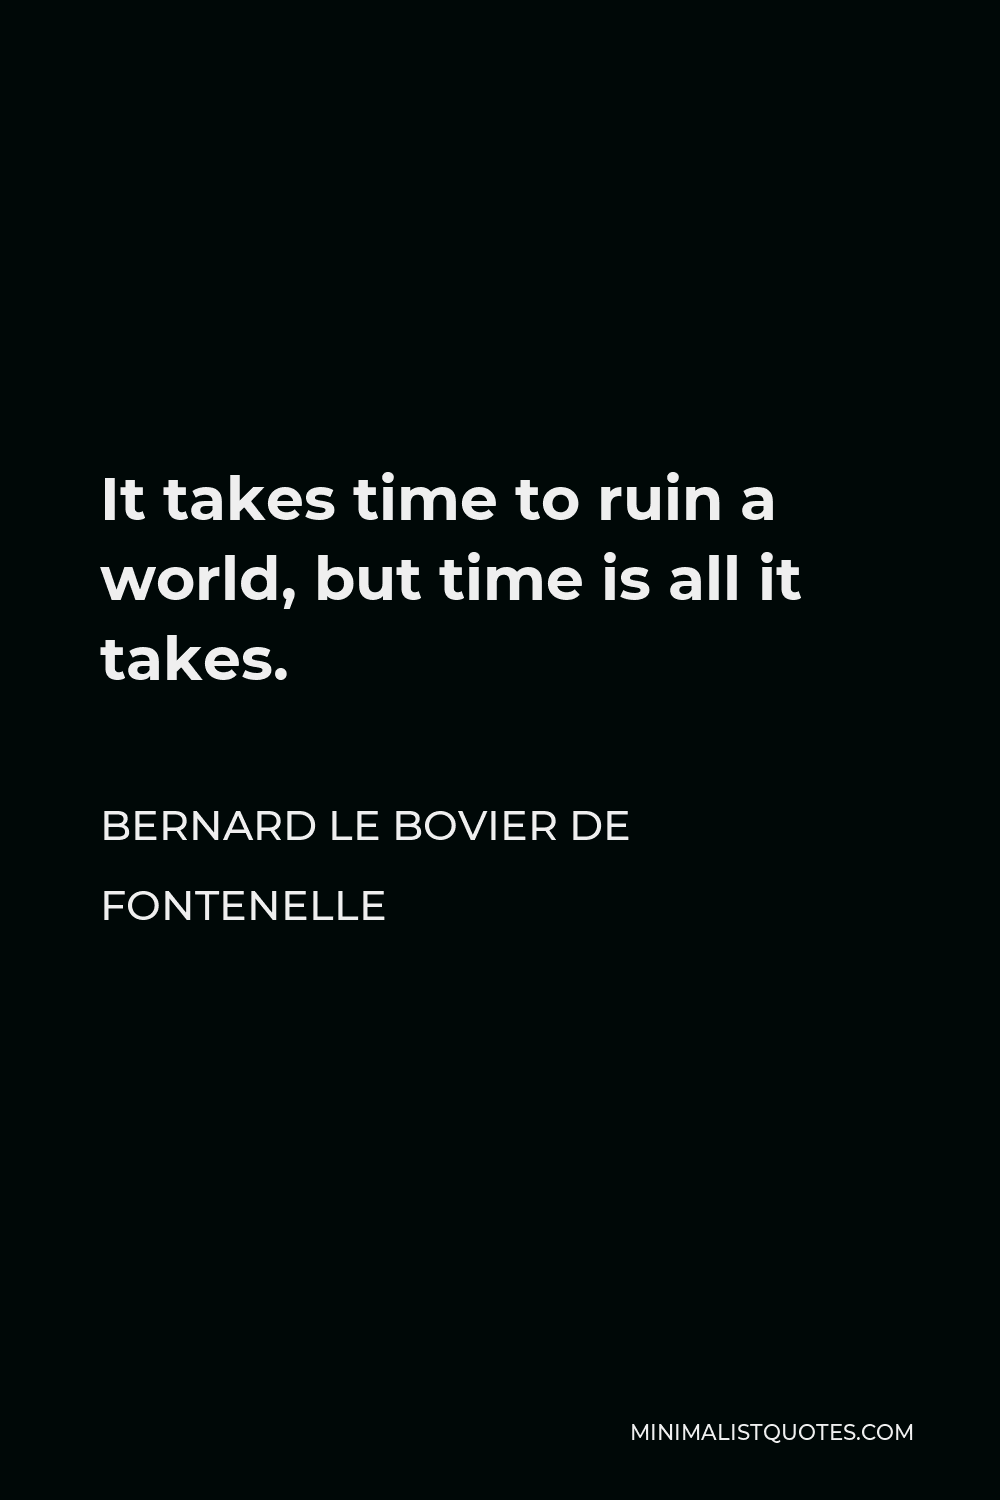 Bernard le Bovier de Fontenelle Quote - It takes time to ruin a world, but time is all it takes.